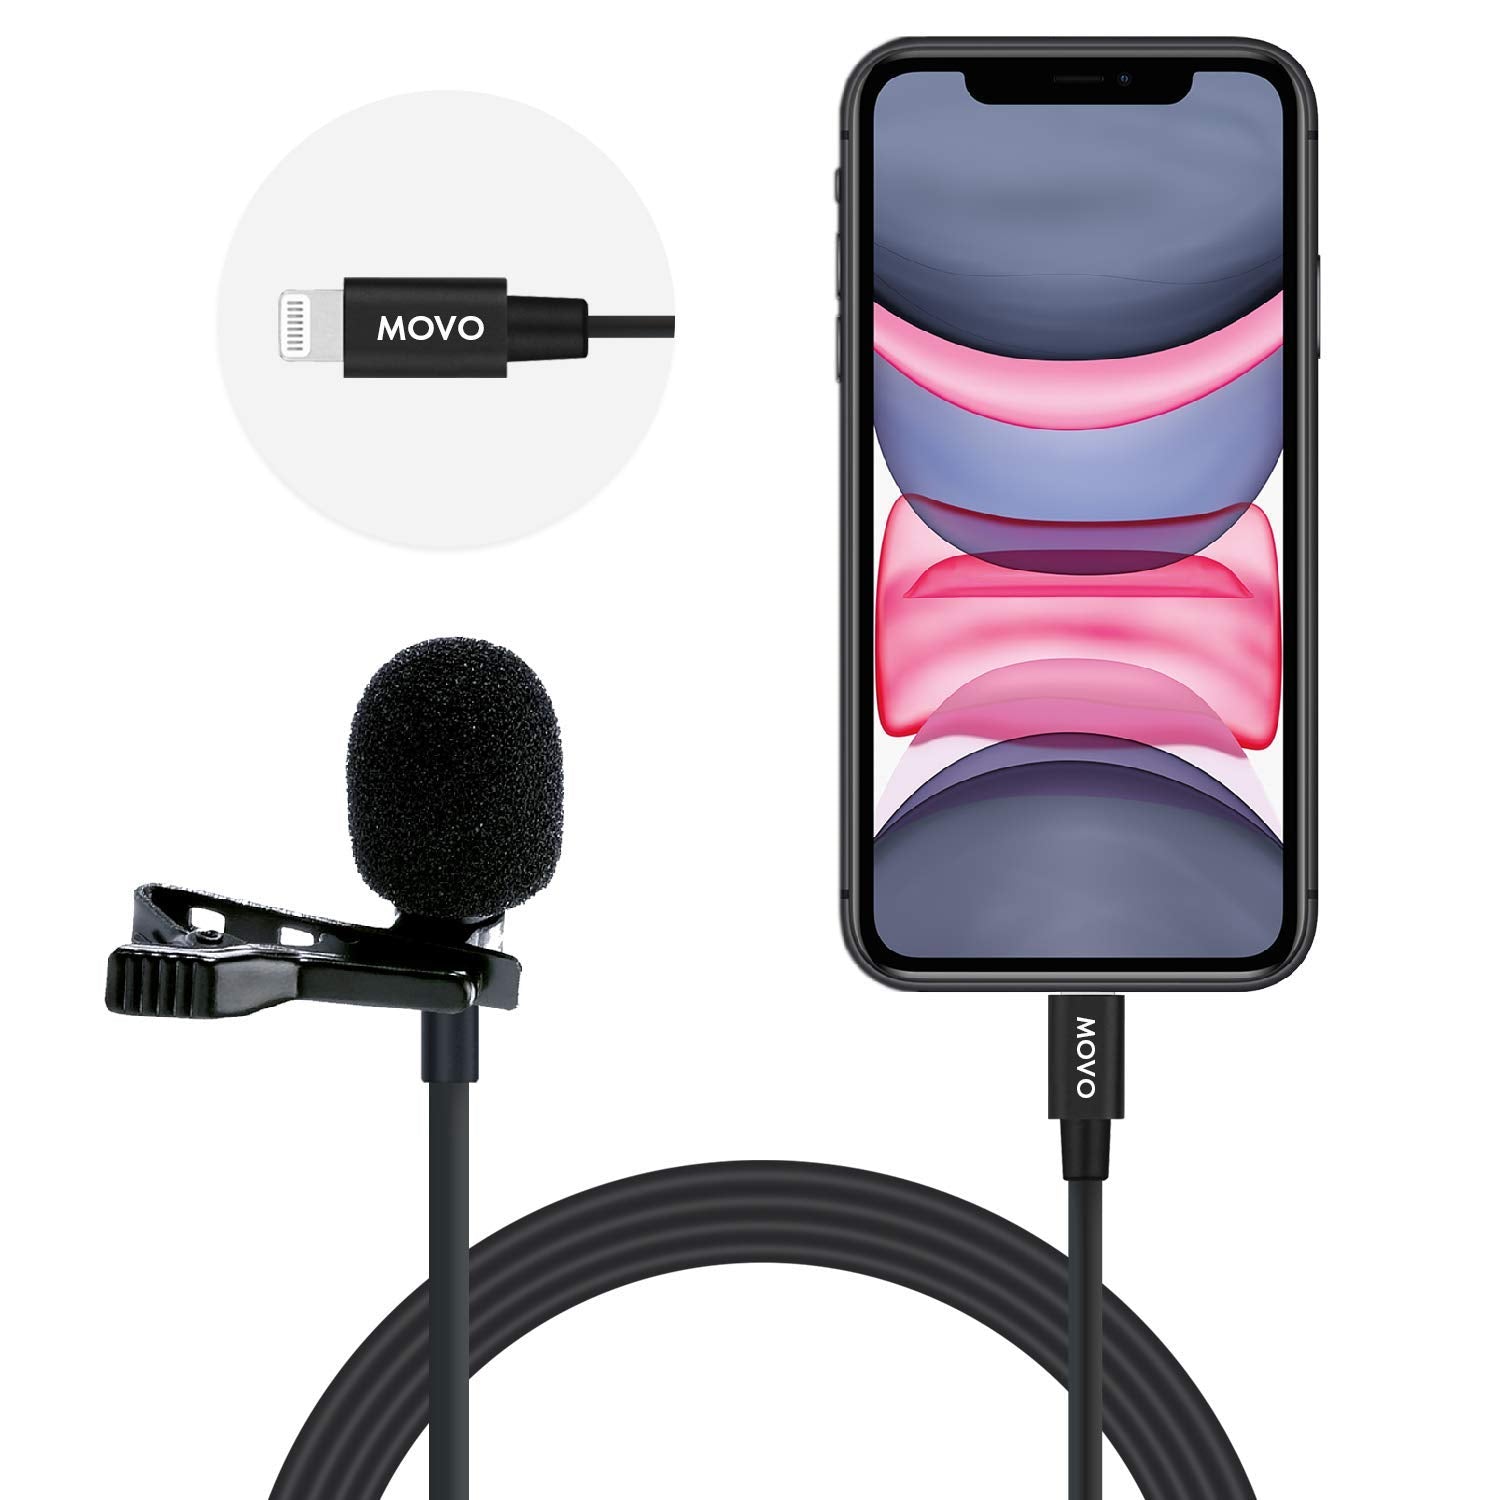 Movo iLav-L Digital Lavalier Omnidirectional Clip on Microphone with MFi Certified Lightning Connector Compatible with iPhone, iPad, iPod, iOS Smartphones and Tablets (20-Foot Cord)  - Very Good